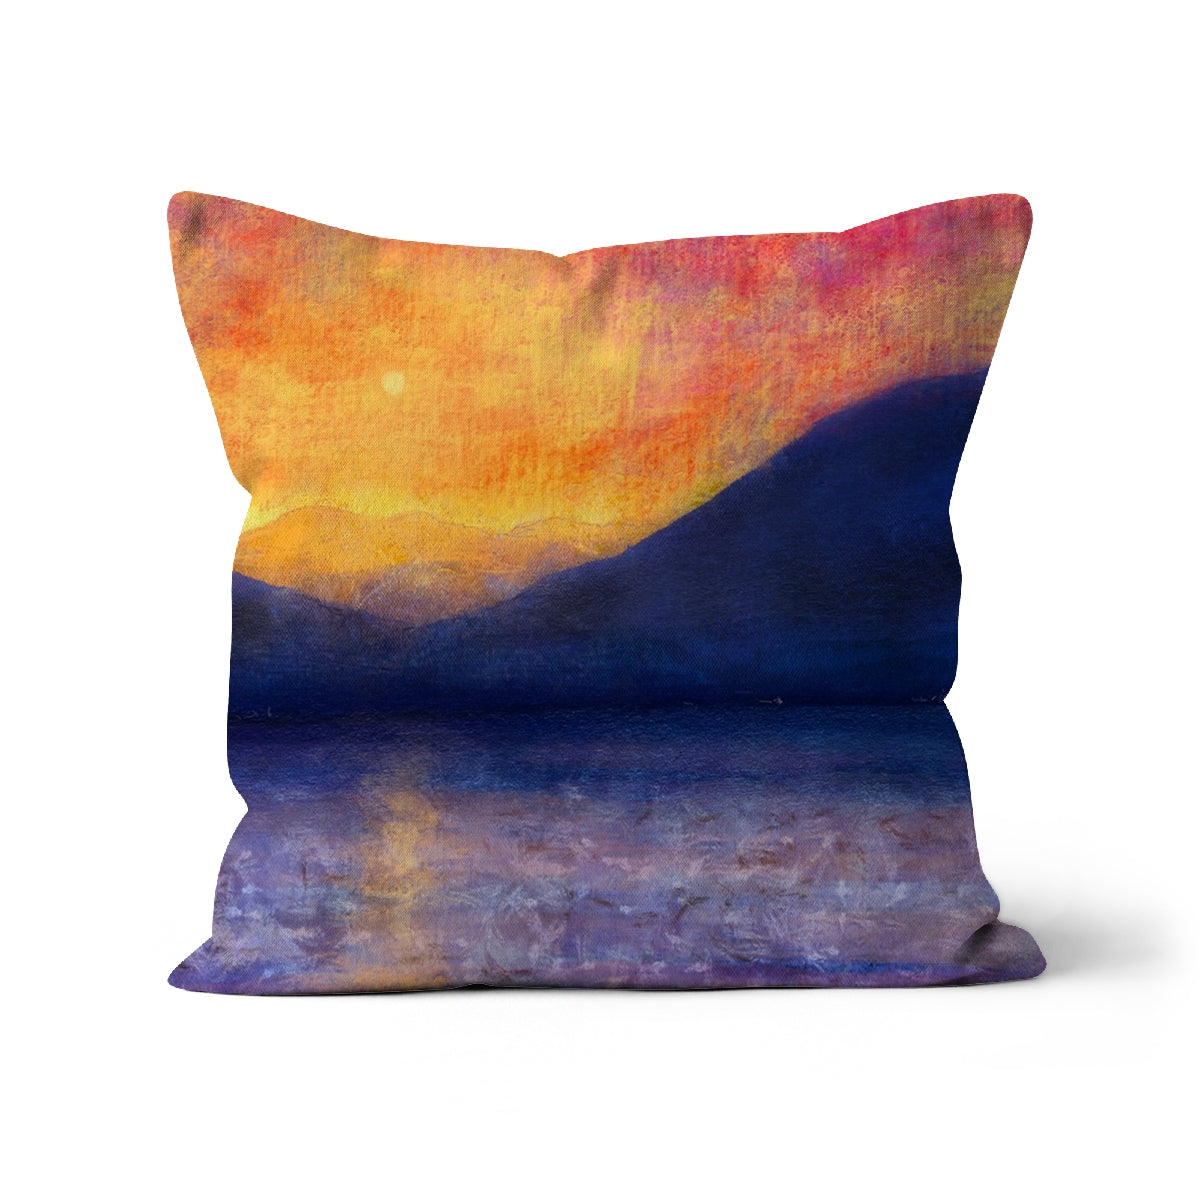 Sunset Approaching Mull Art Gifts Cushion-Cushions-Hebridean Islands Art Gallery-Faux Suede-24"x24"-Paintings, Prints, Homeware, Art Gifts From Scotland By Scottish Artist Kevin Hunter